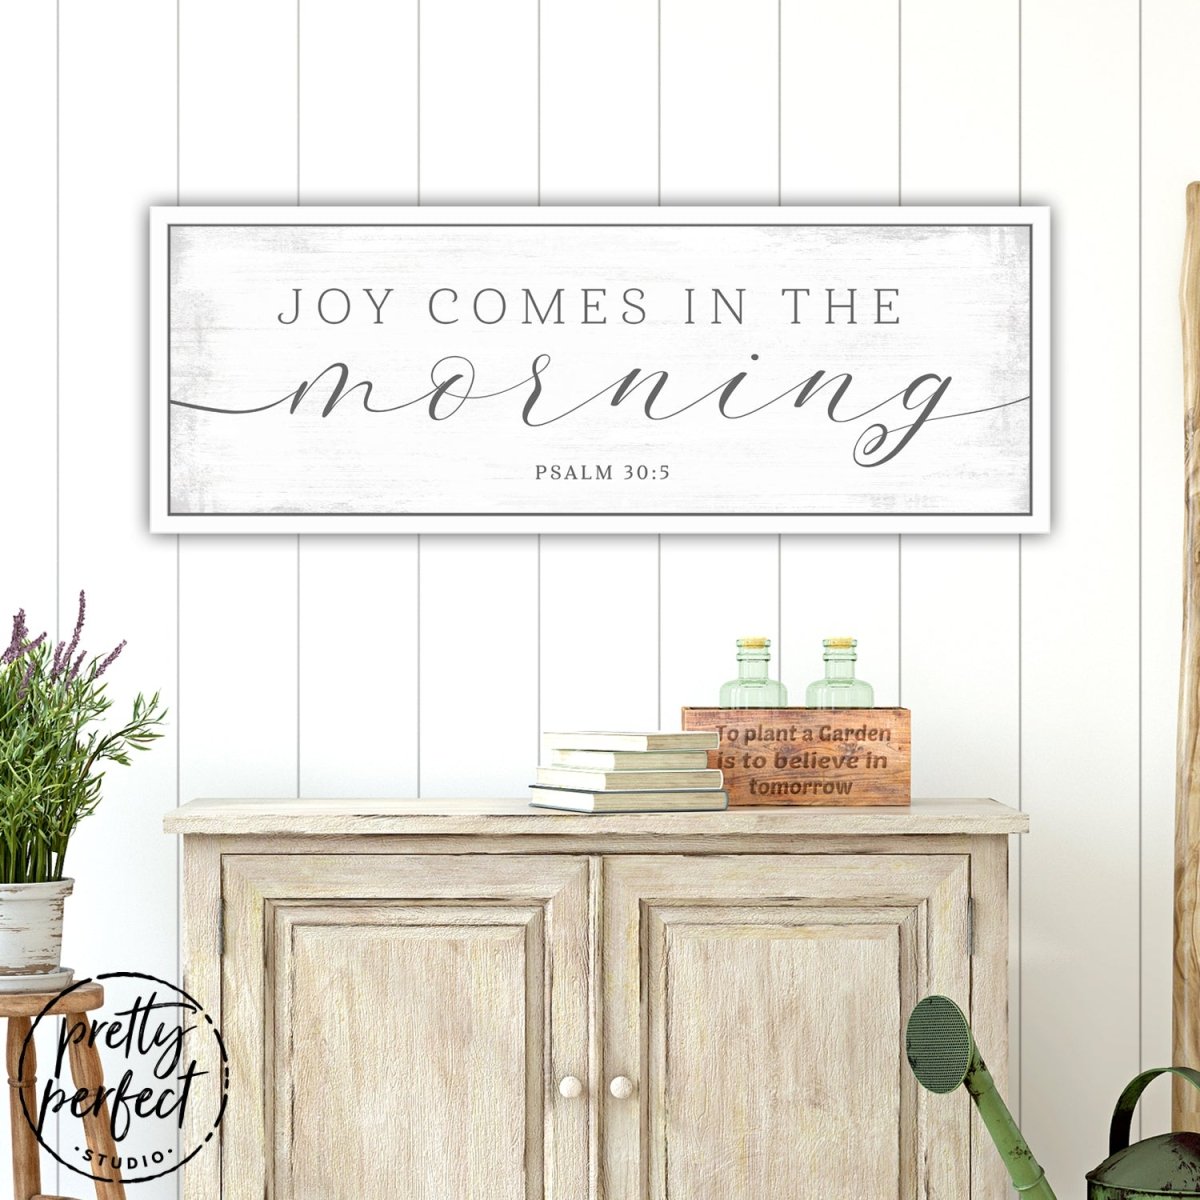 Joy Comes In The Morning Sign Above Entryway Table - Pretty Perfect Studio